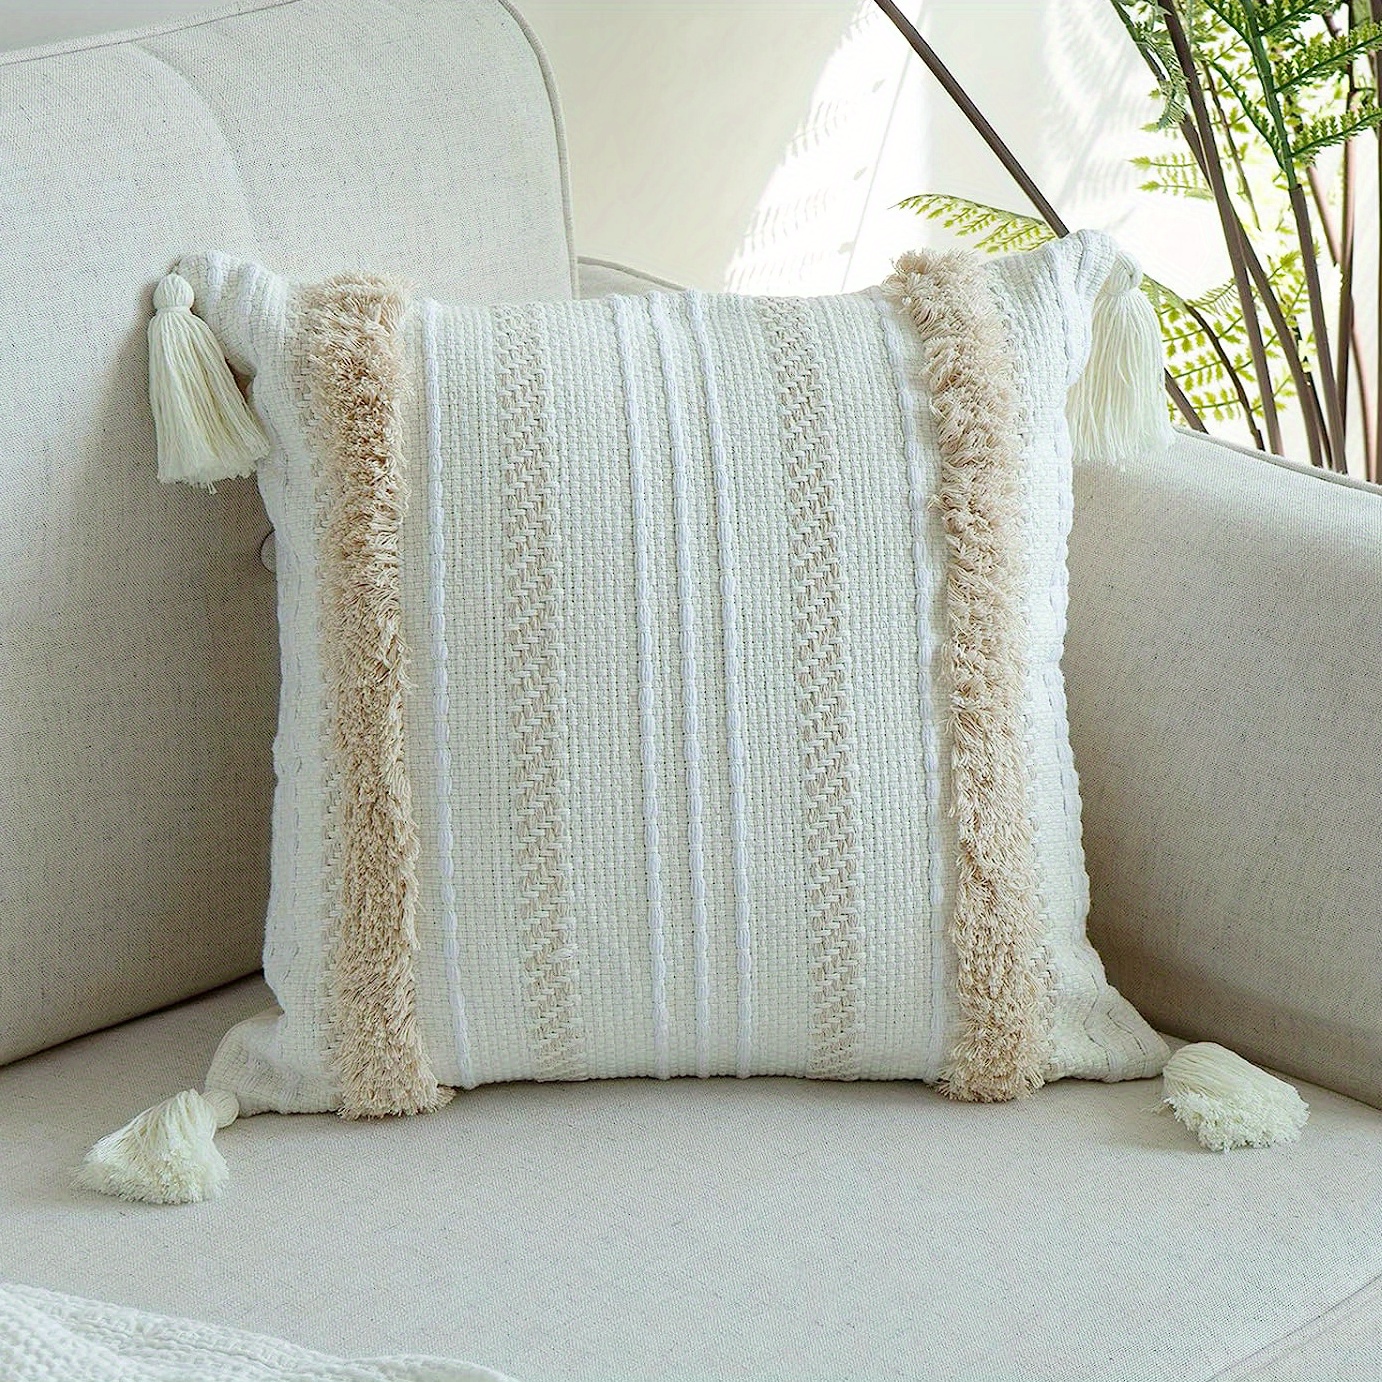 Boho Throw Pillow Covers Tufted Decorative Pillows Cover for Couch Bed  Small Lumbar 12 x 20 inch Pillow Cover, Modern Accent Farmhouse Neutral  Throw